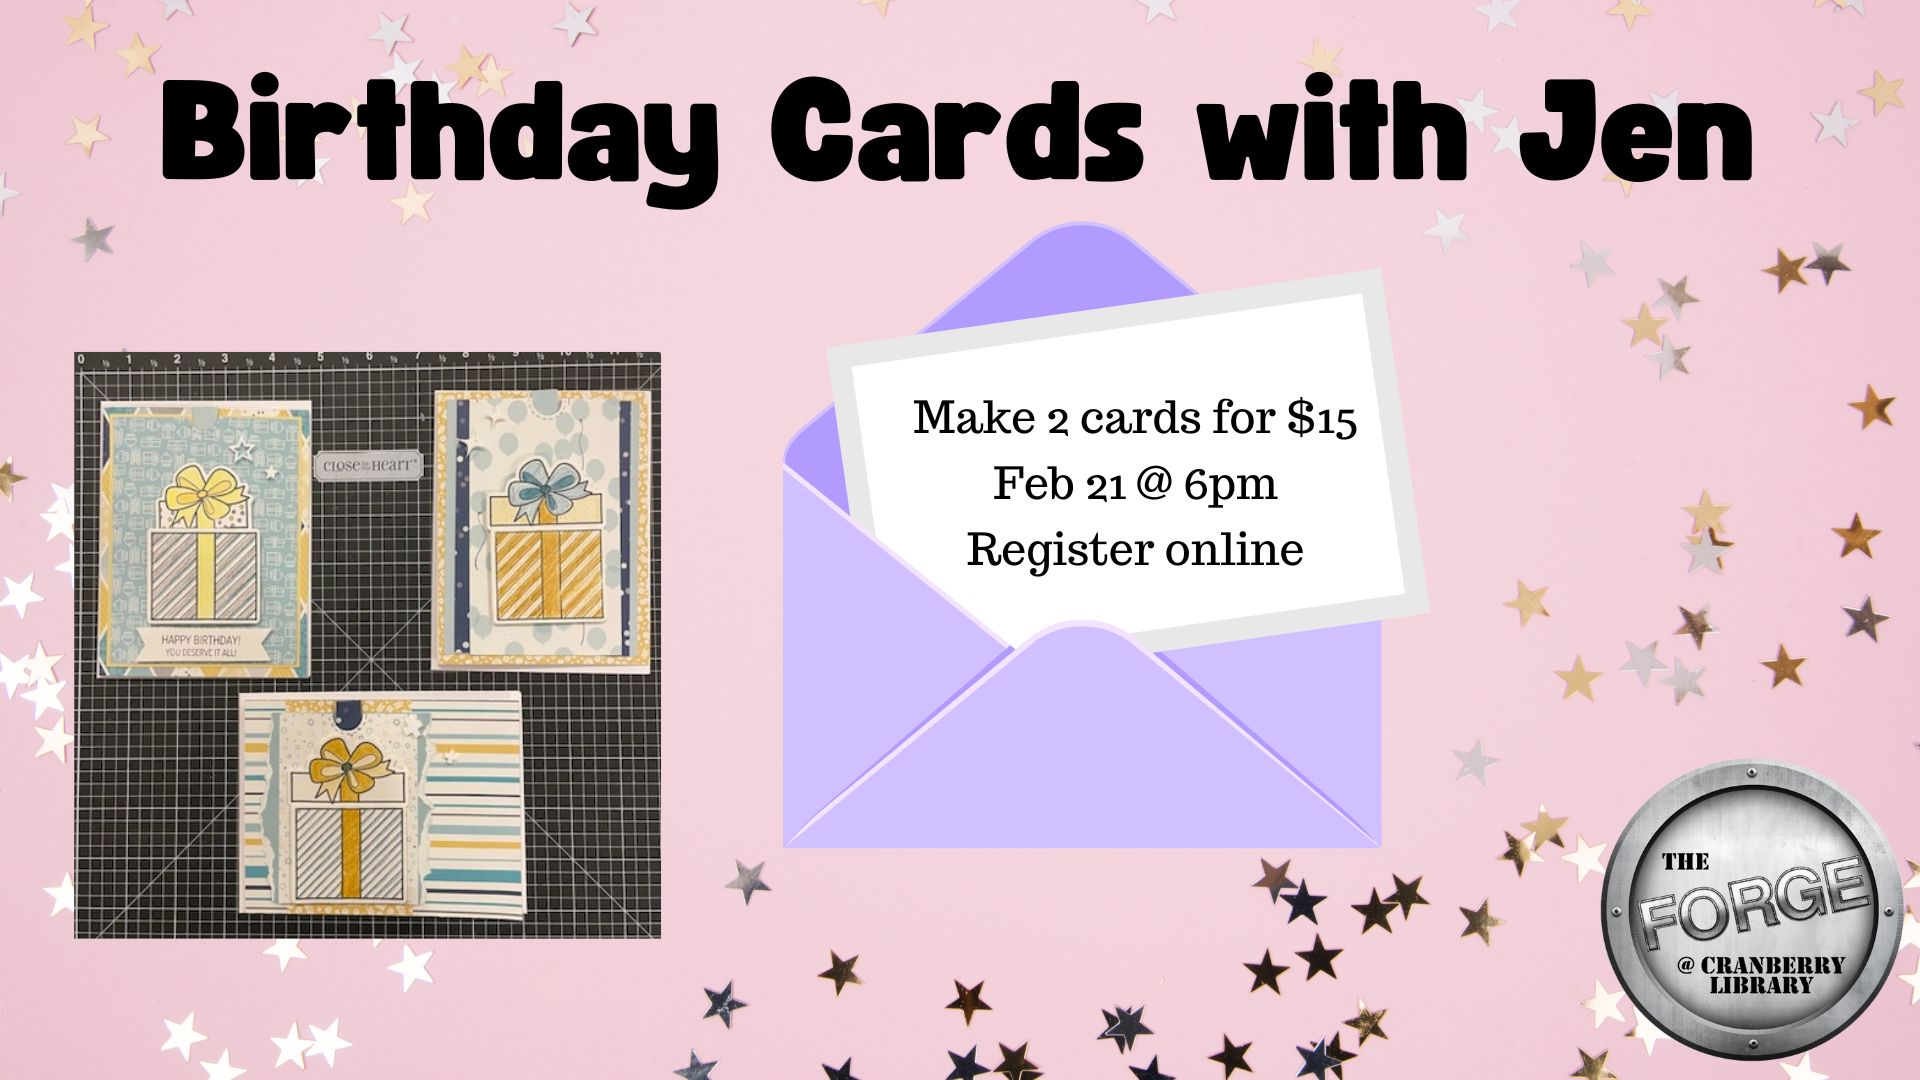 Flyer for Birthday Cards with Jen in The Forge